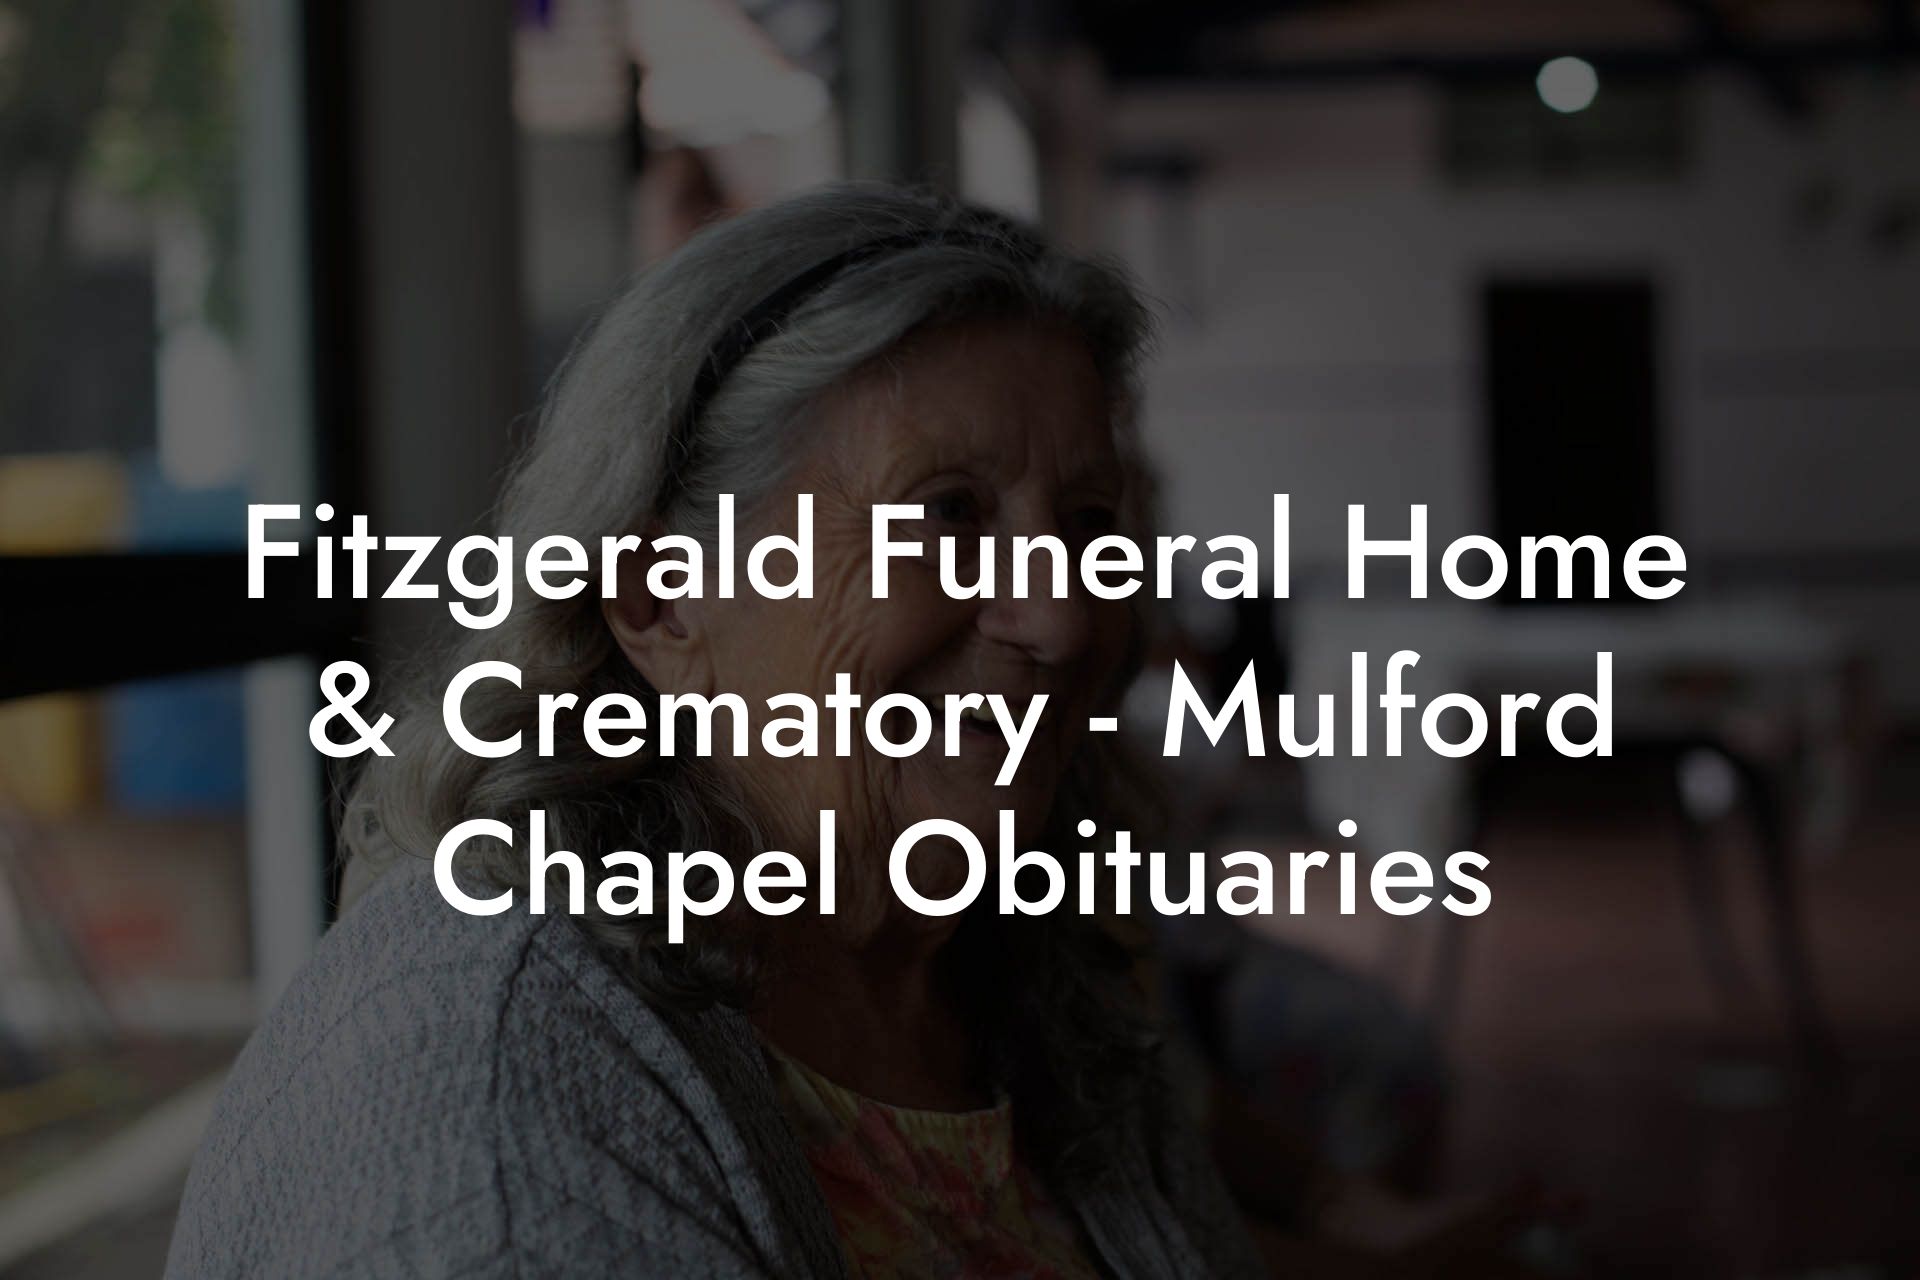 Fitzgerald Funeral Home & Crematory - Mulford Chapel Obituaries